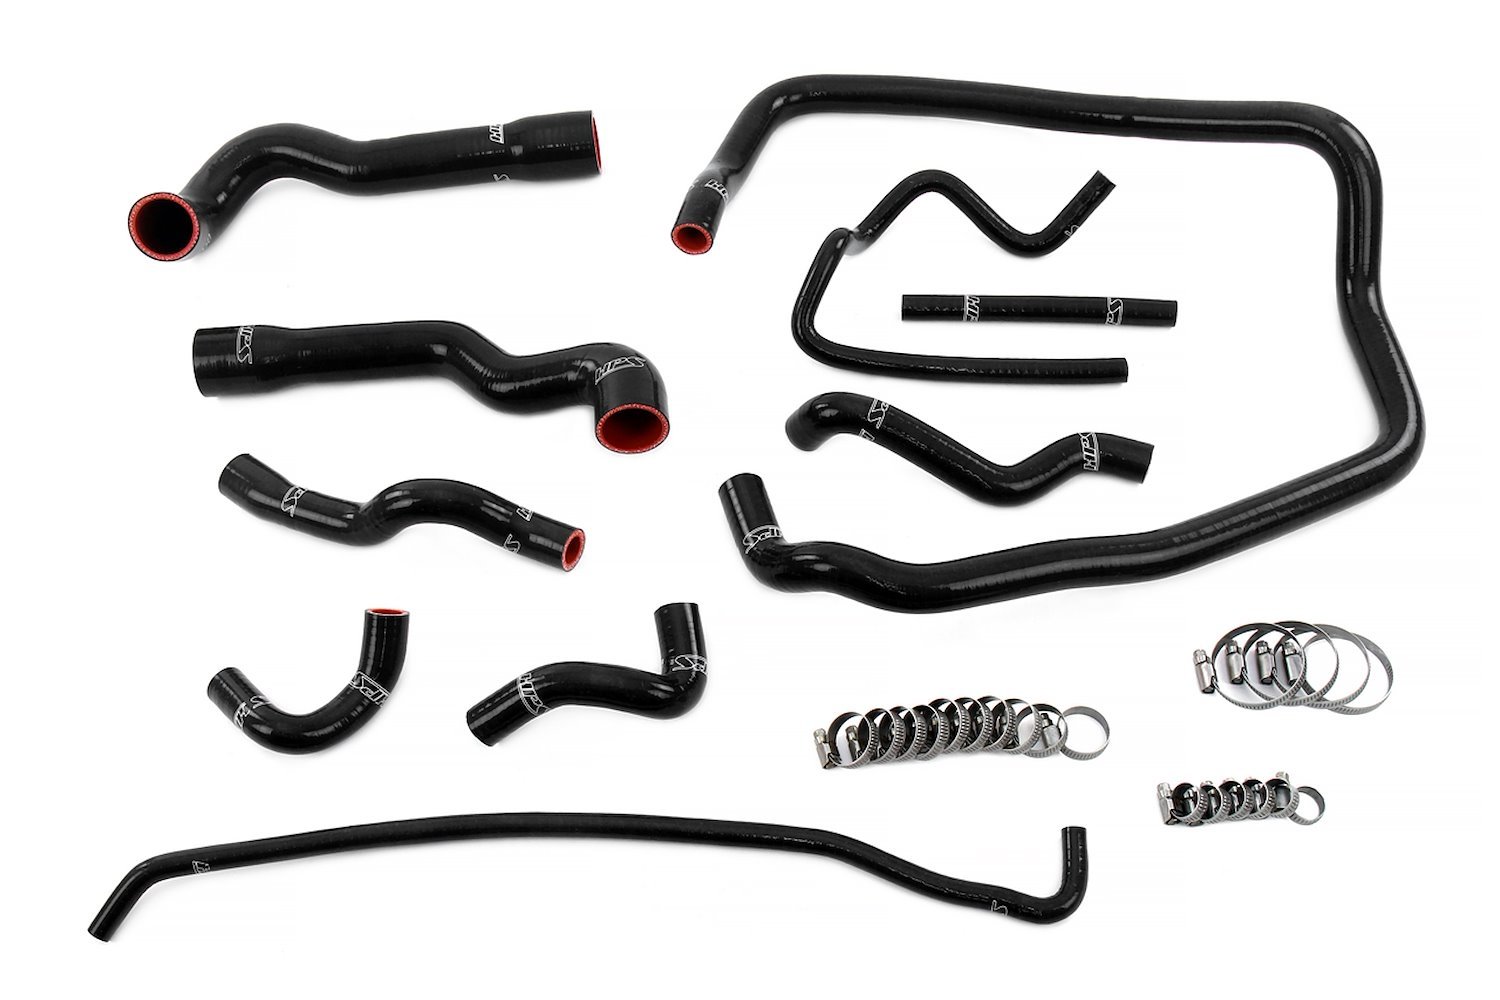 57-2088-BLK Coolant Hose Kit, 3-Ply Reinforced Silicone Radiator, Heater, Throttle Body, Expansion Tank Hoses